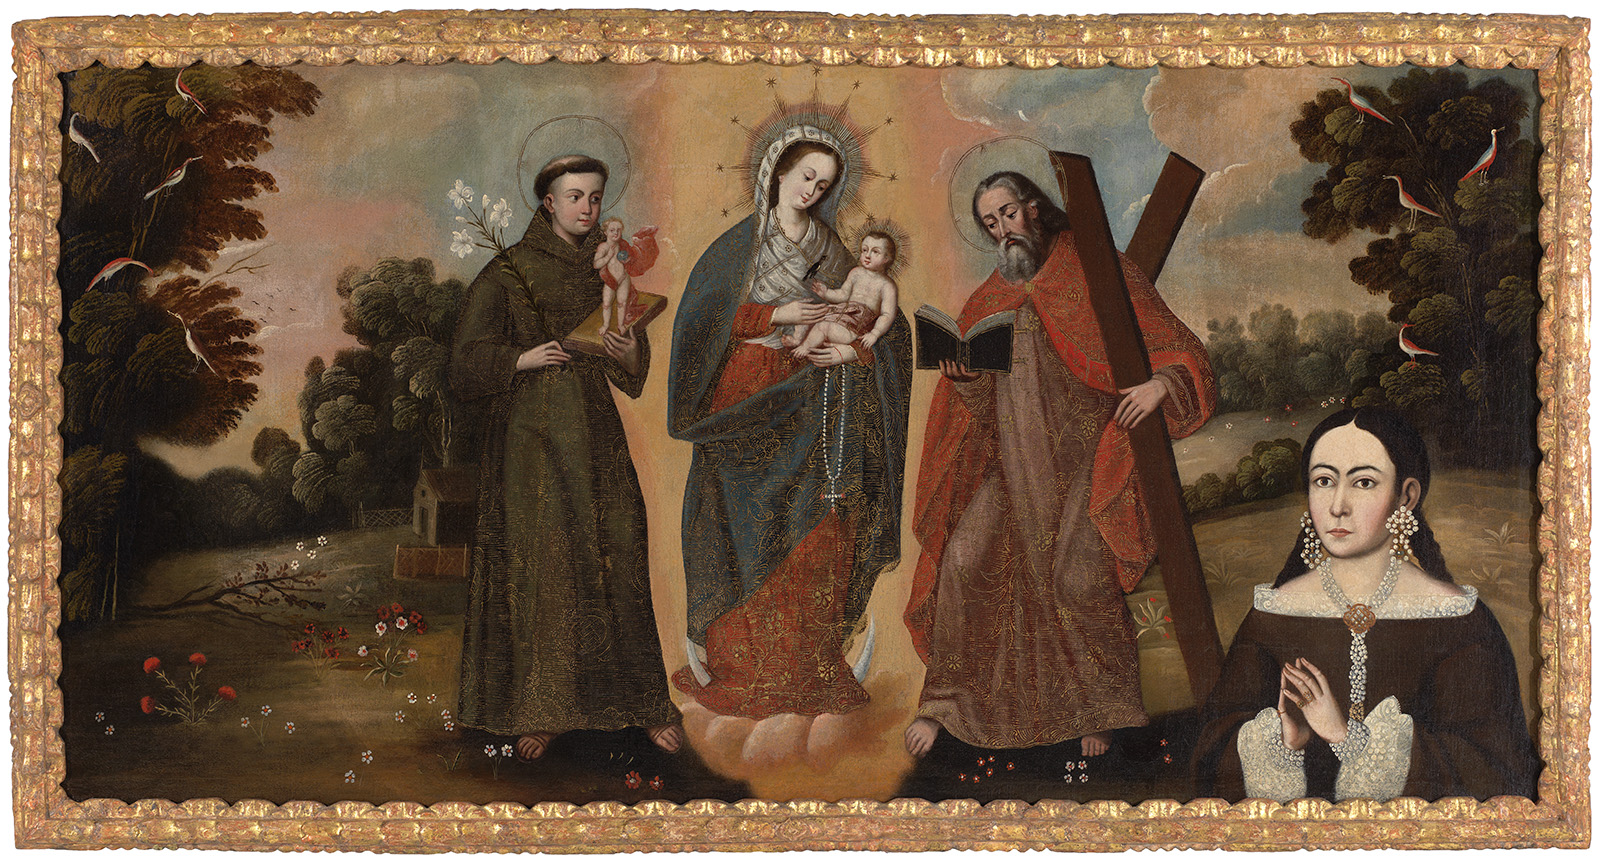 A landscape painting where Our Lady of the Rosary is flanked by Saints Andrew with a cross and Anthony of Padua holding a book with the figure of the Christ Child standing on it at the center, and a portrait of a woman with dark hair wearing pearls appears at bottom right.